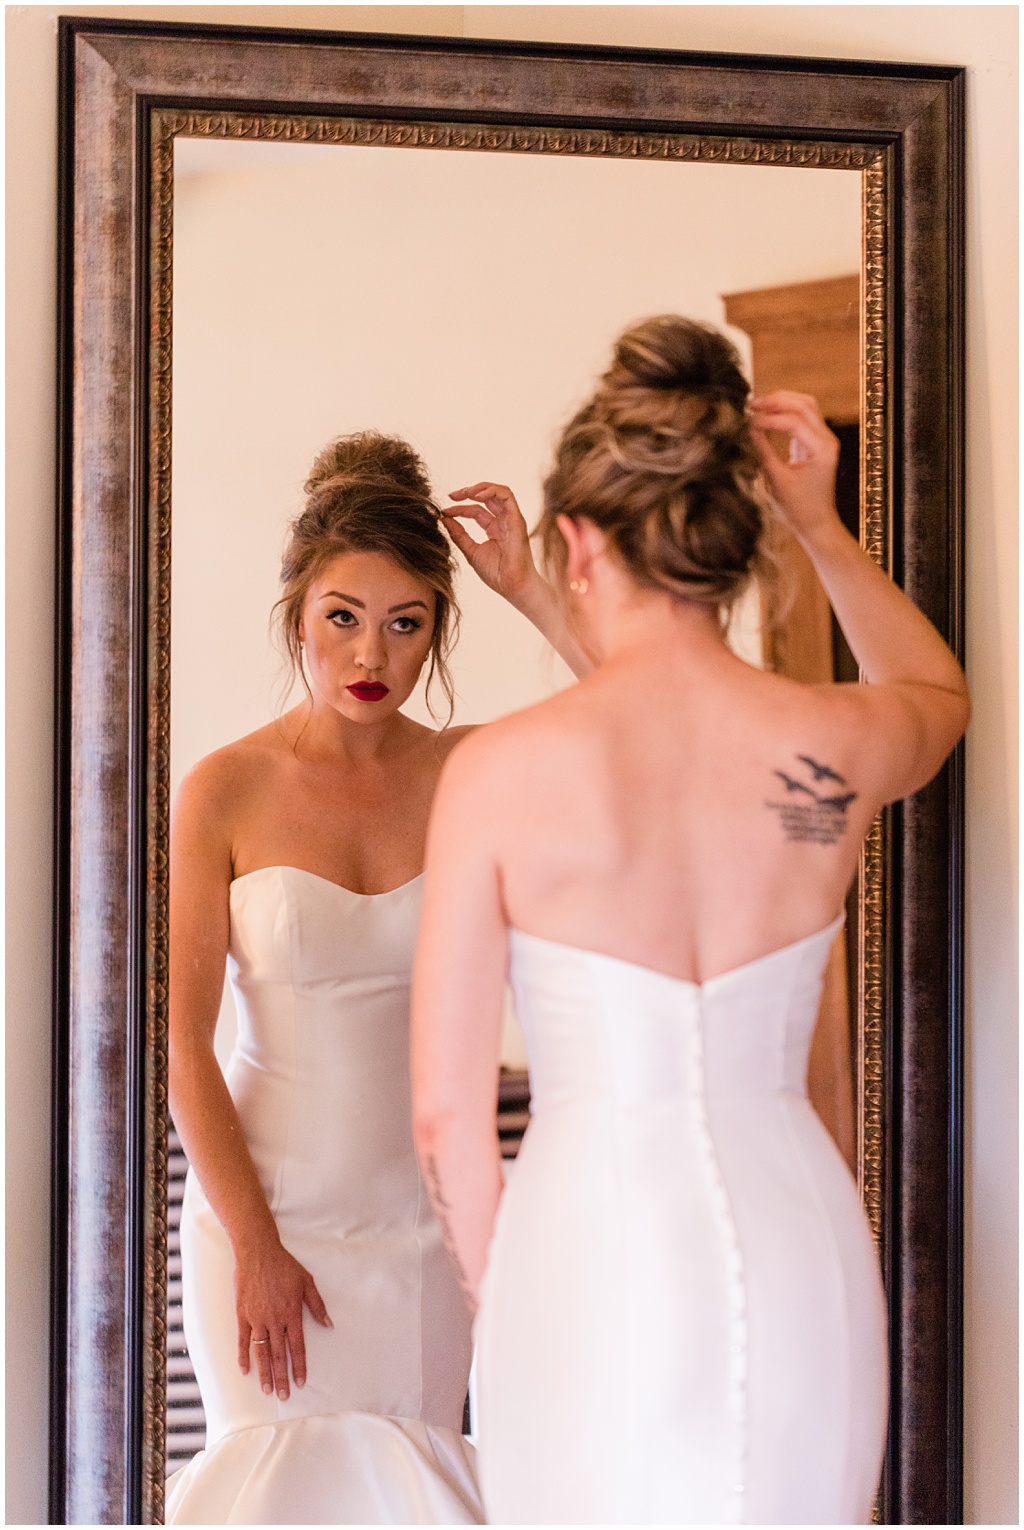 bride with a shoulder tattoo of birds and words wearing a strapless gown checks her hair in a full length mirror which also shows off the mermaid style of her dress and flattering figure